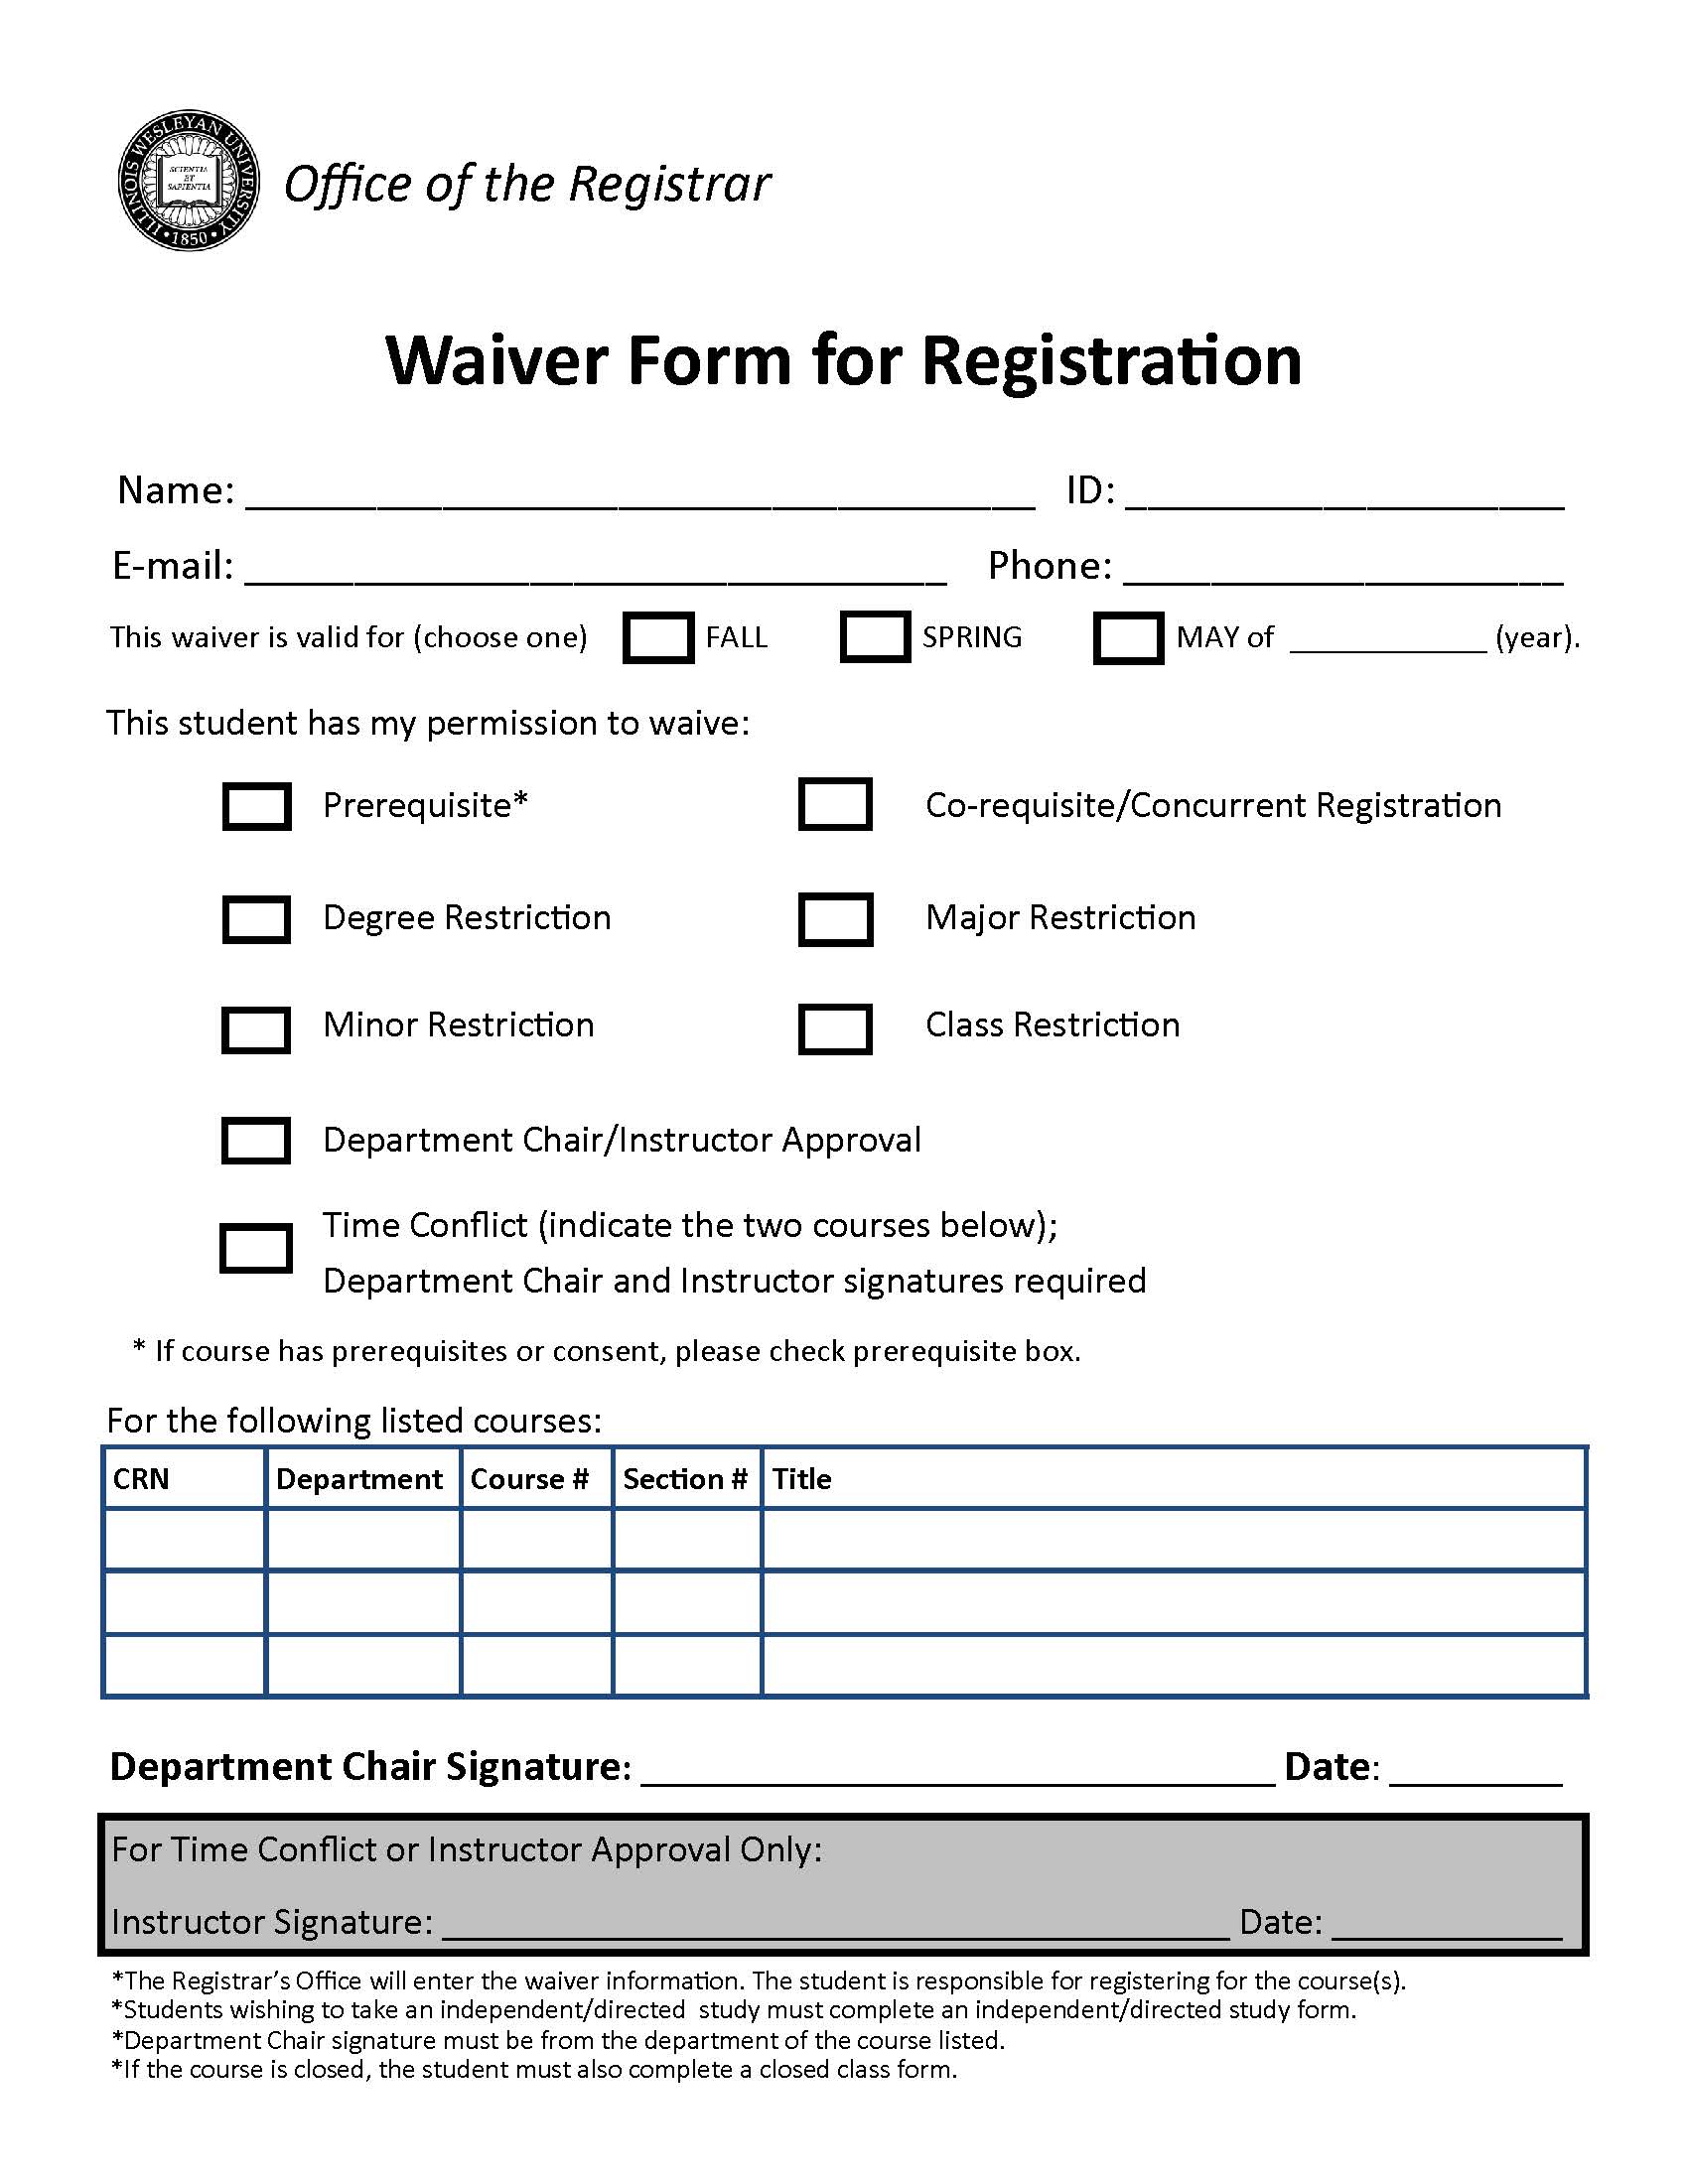 Waiver form